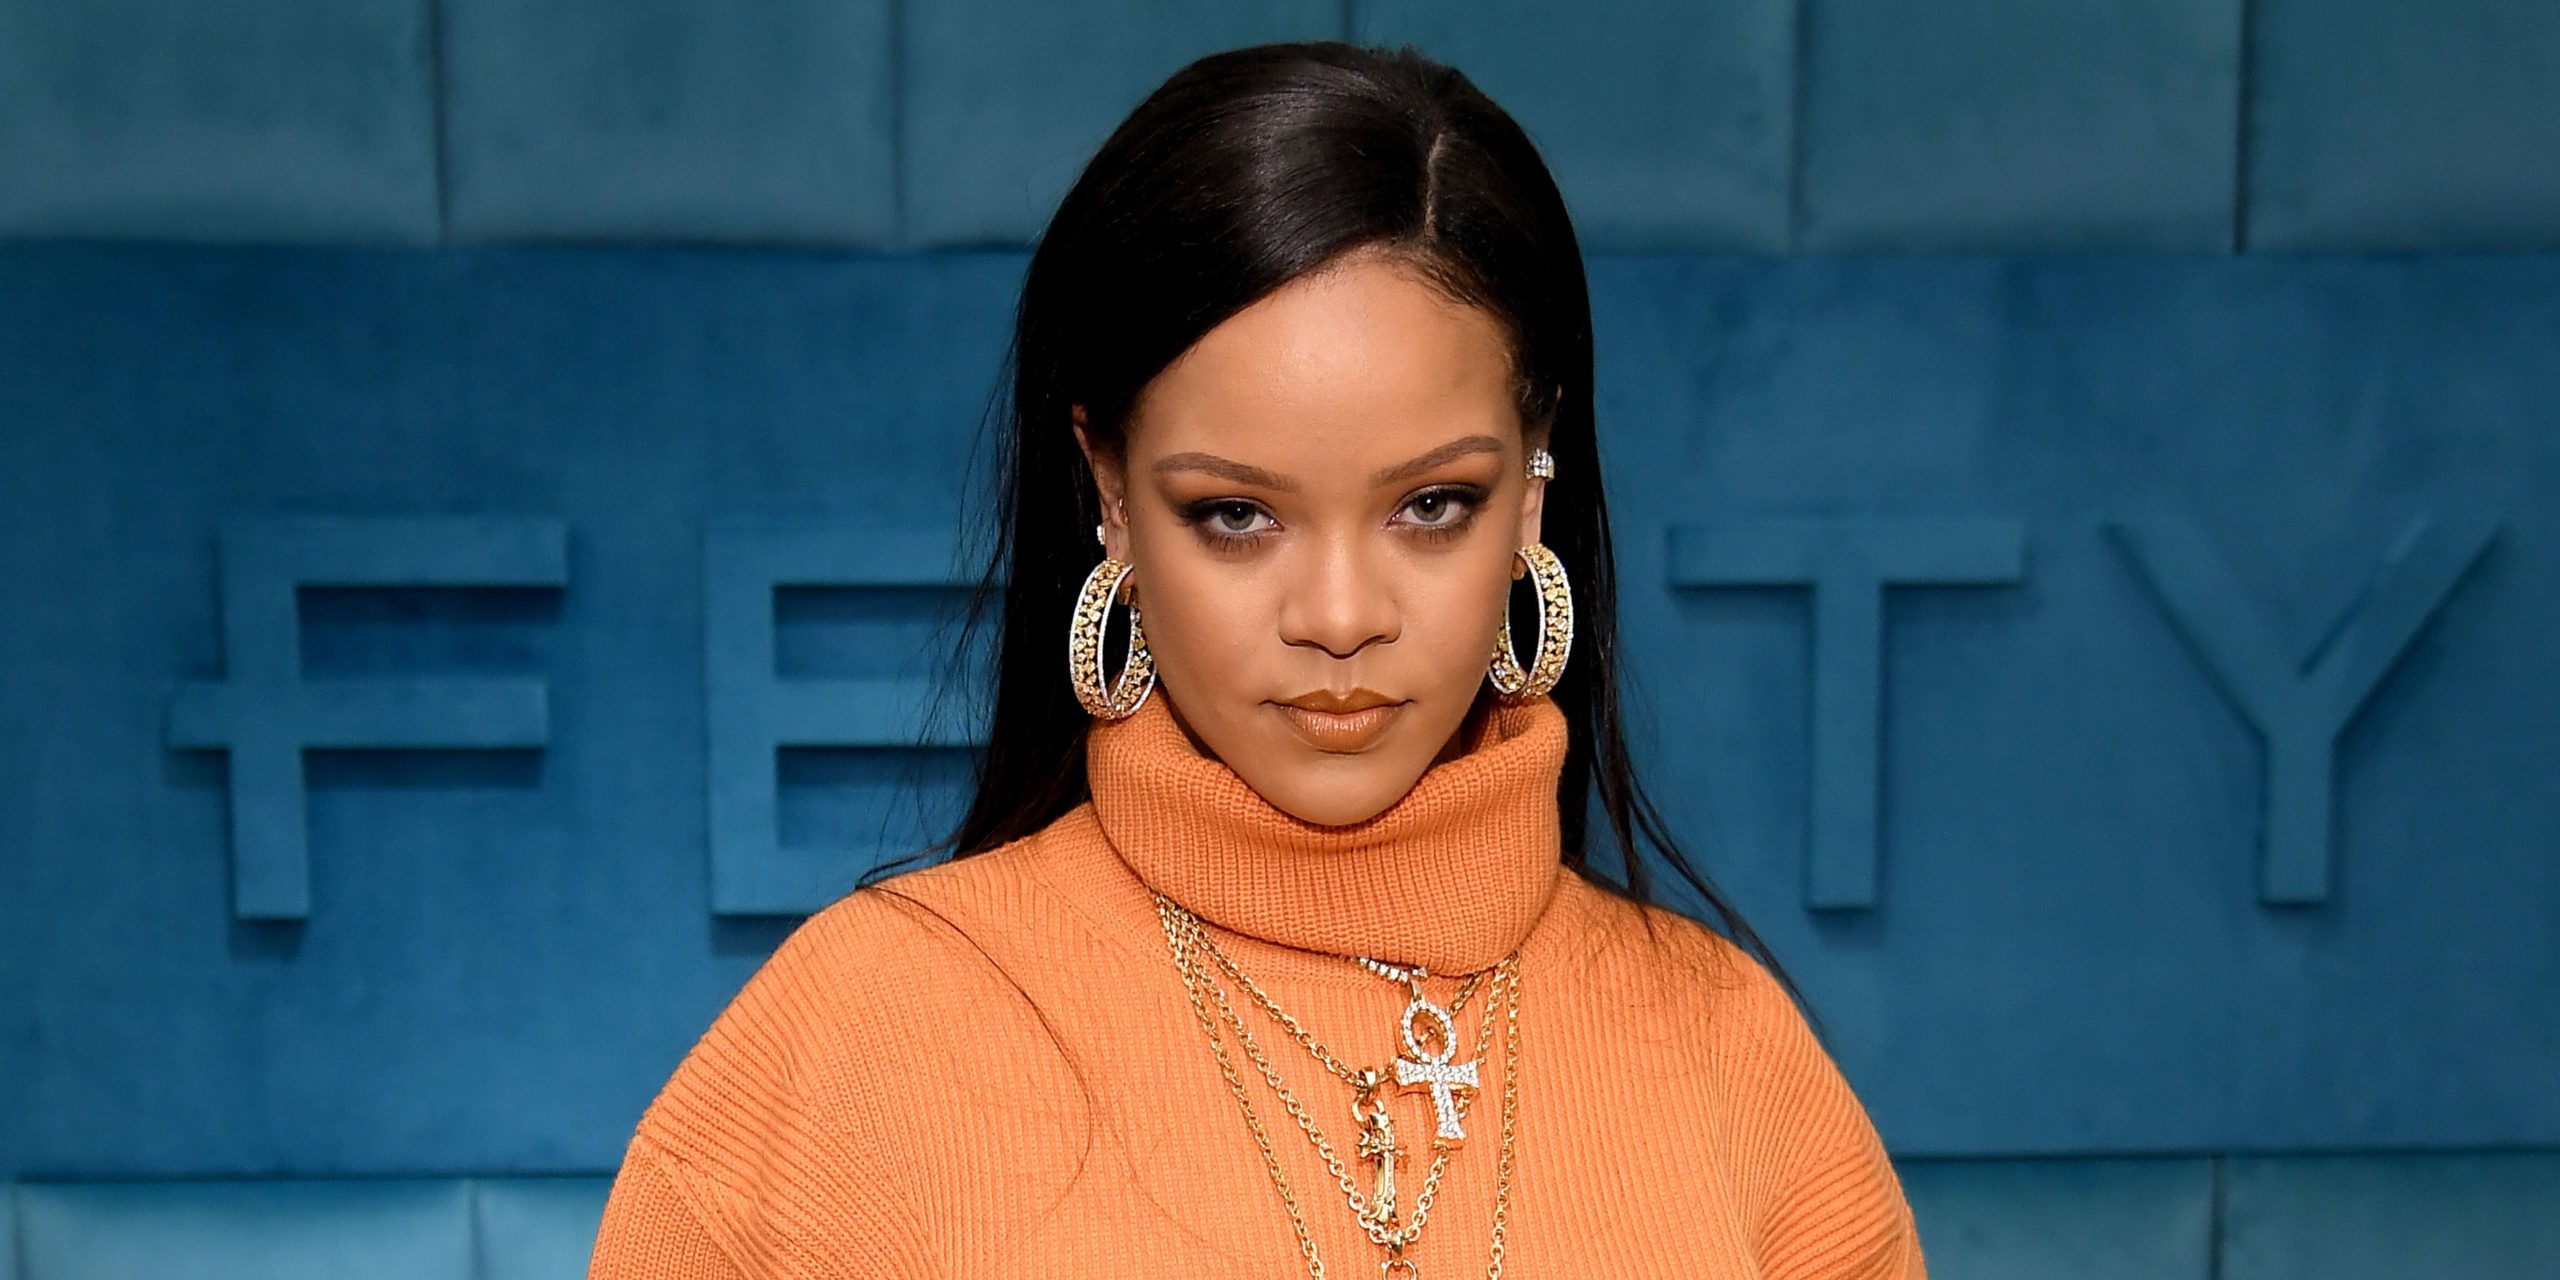 Is Rihanna Launching Hair Care? Here's What We Know